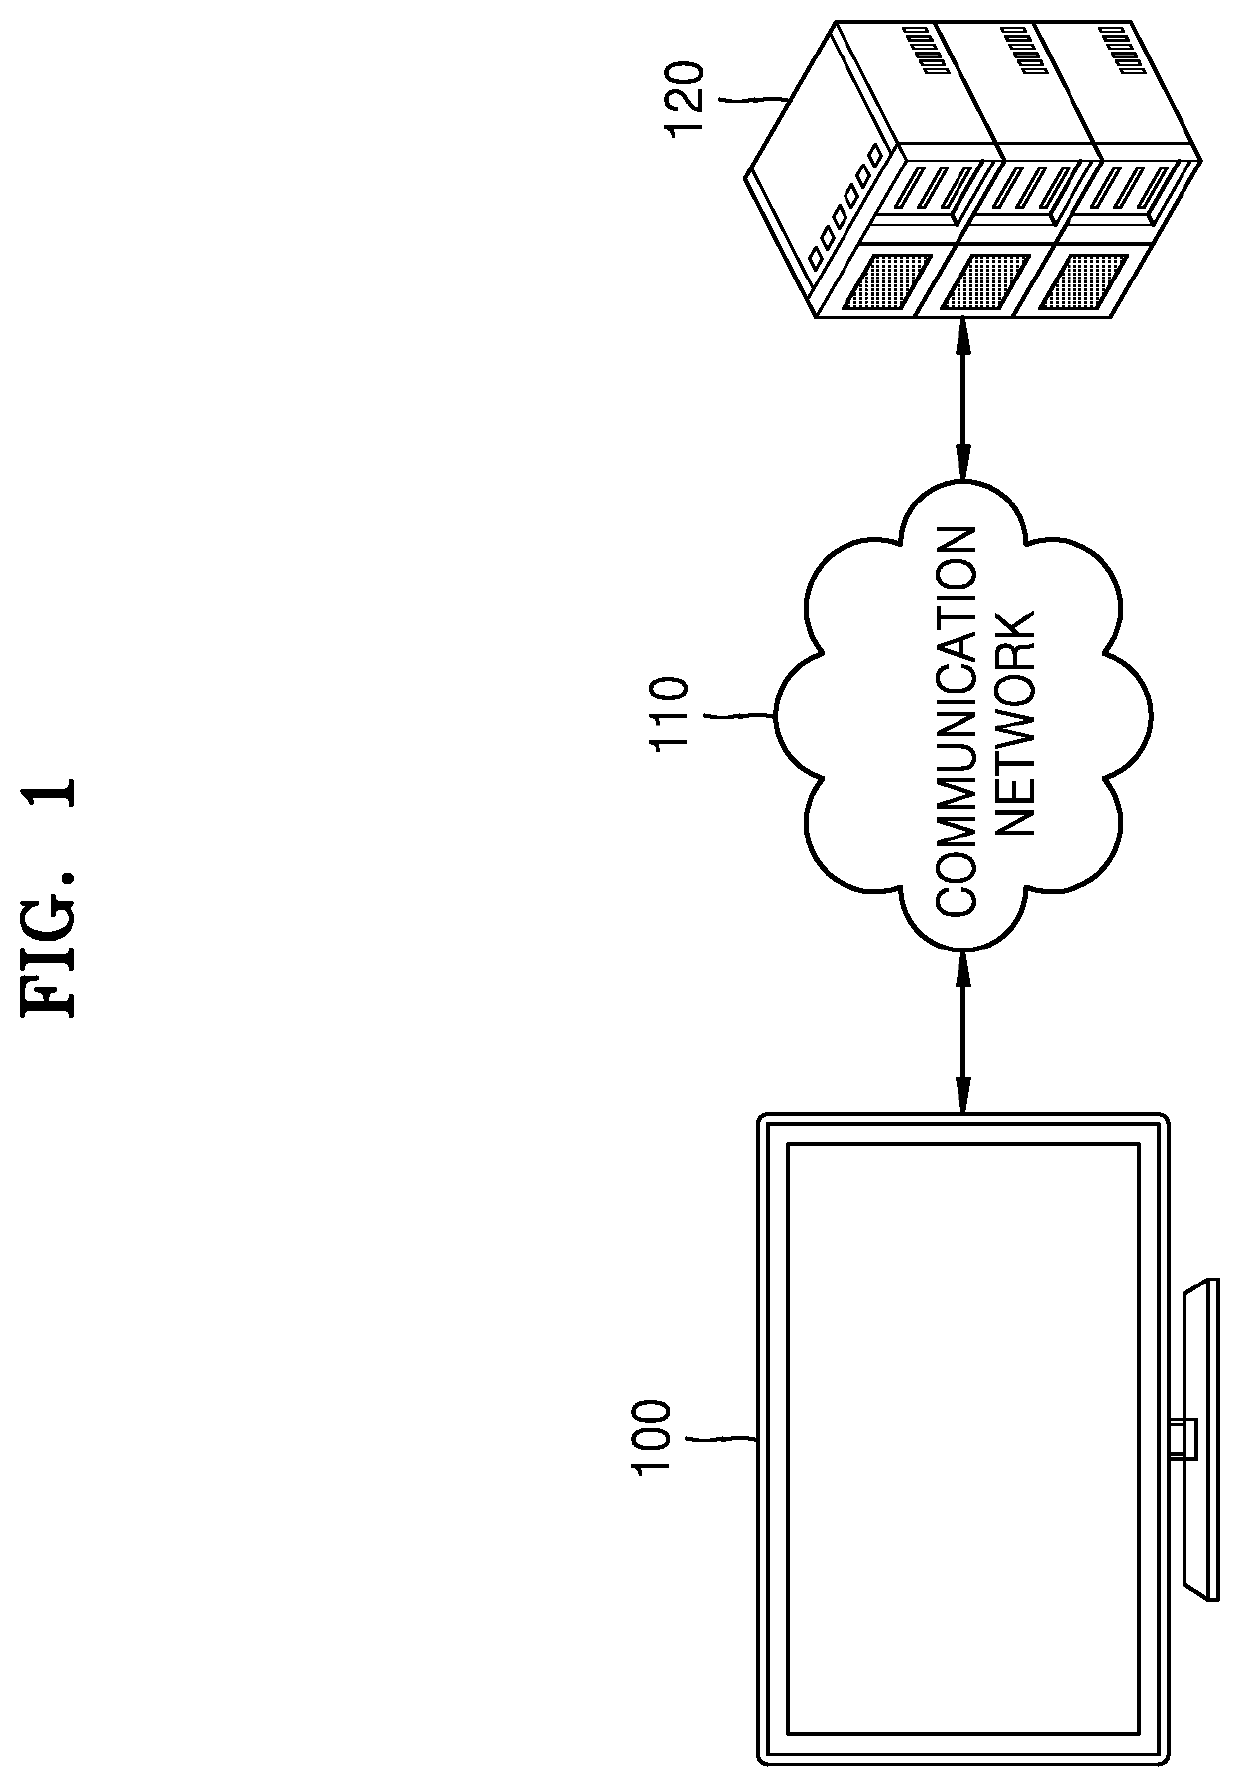 Display device and server for communicating with display device